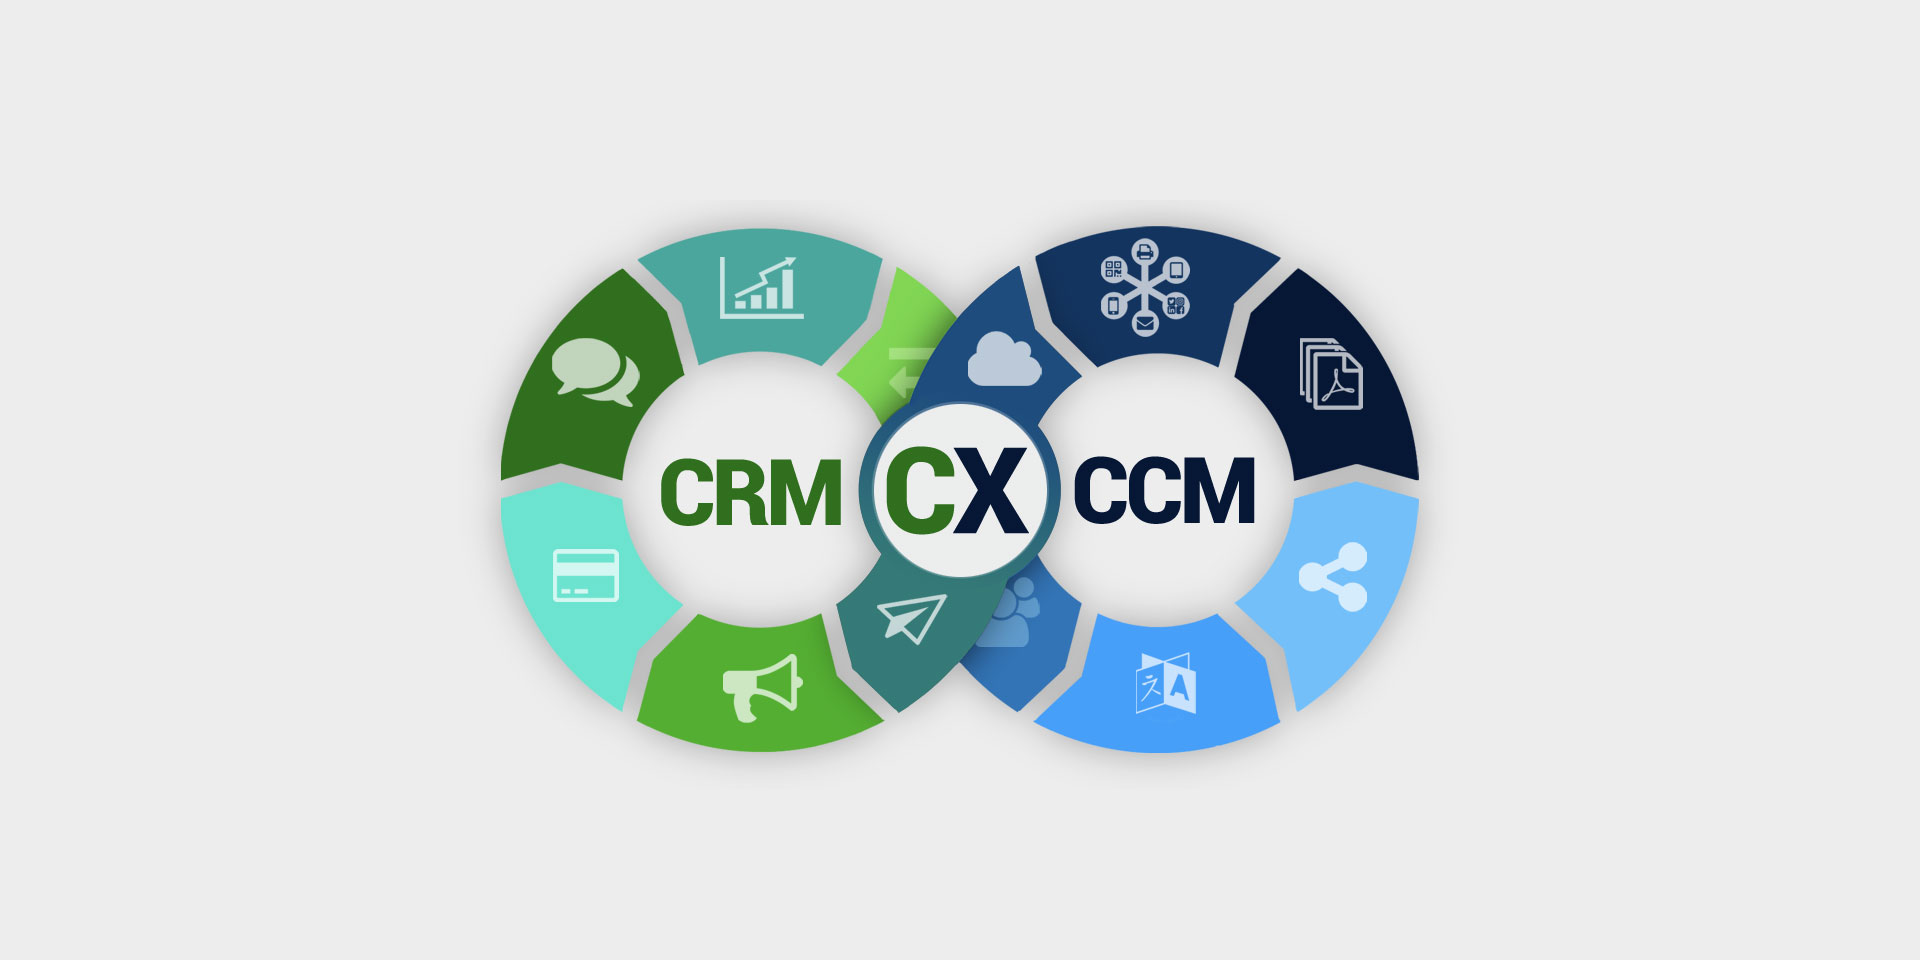 Customer Relationship Management (CRM) and Customer Communications Management (CCM) are similar concepts, although they serve distinct purposes in business.